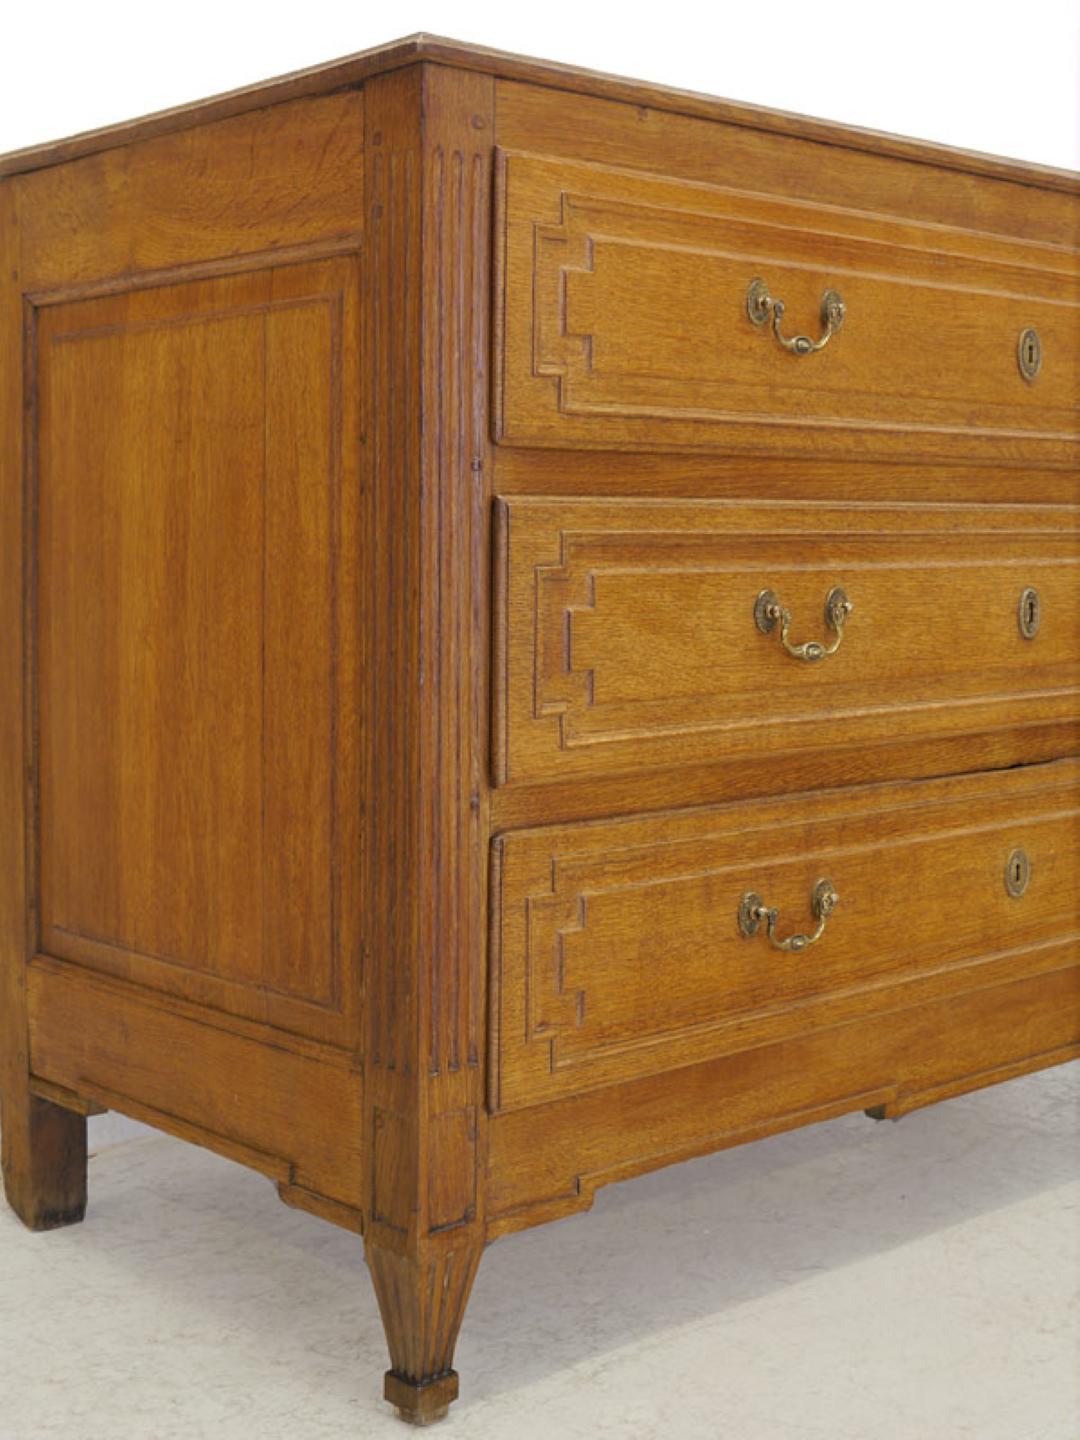 Beautiful Grunderzeit chest of drawers made of solid oak, circa 1880 from Germany.
The wide and beautiful dresser is equipped with three large drawers.
The surface of the drawers is decorated with wonderful grooves.
Especially the four-edged